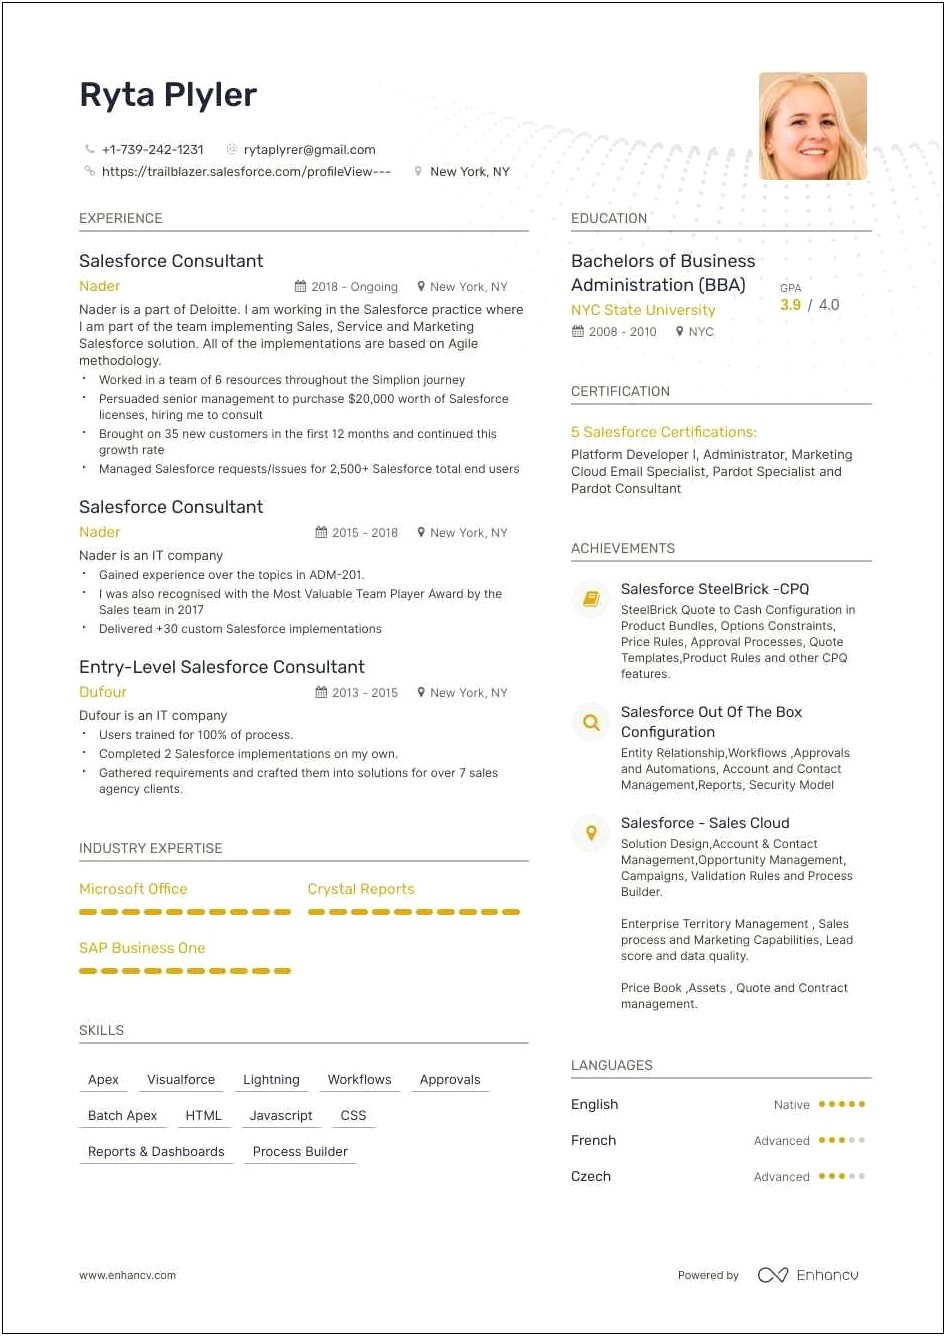 Listing Consulting Jobs On Resume